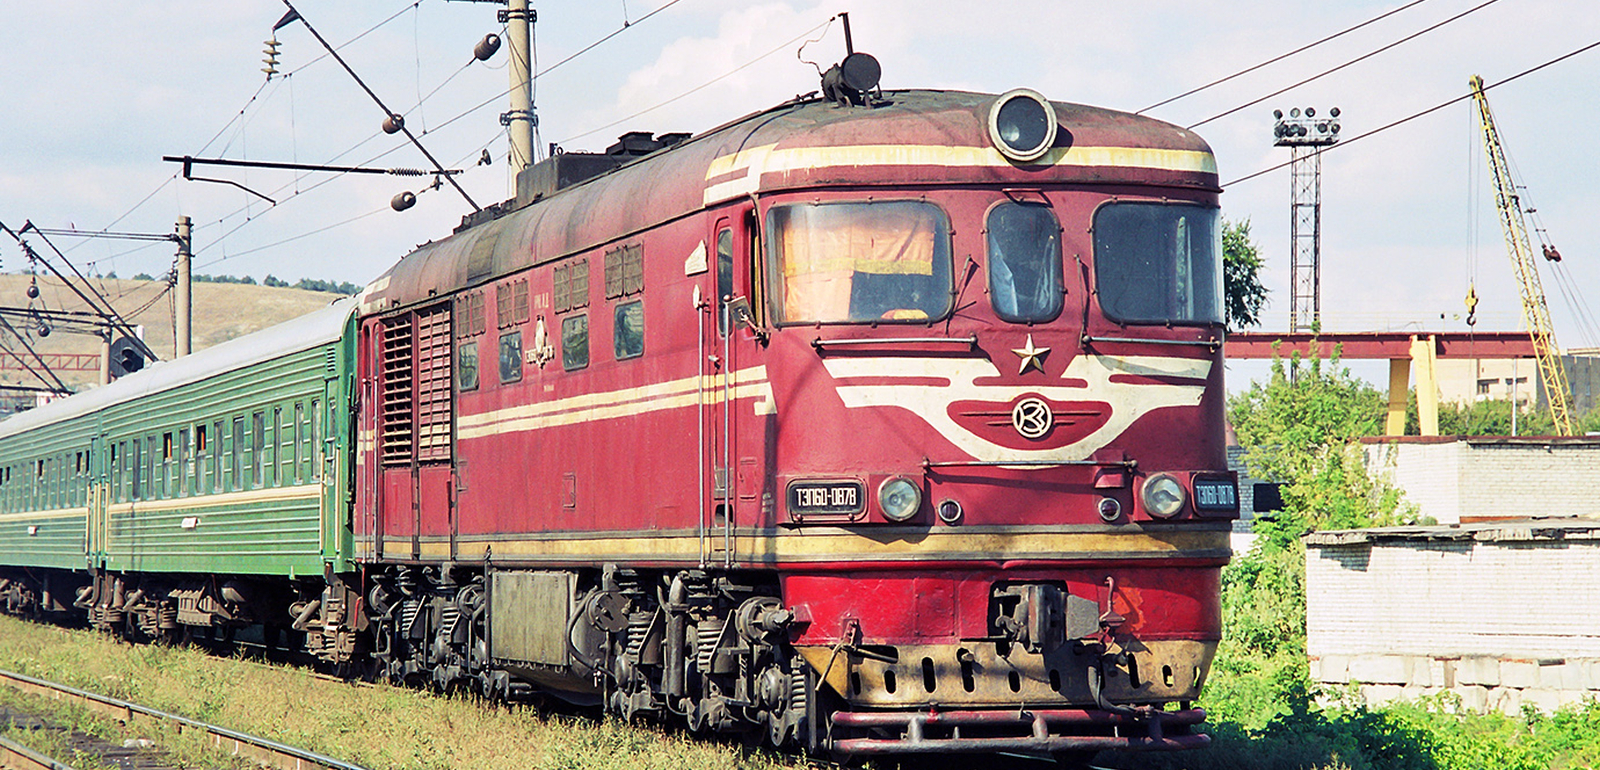 ТЭП60-0878 in August 2010 in Saratov